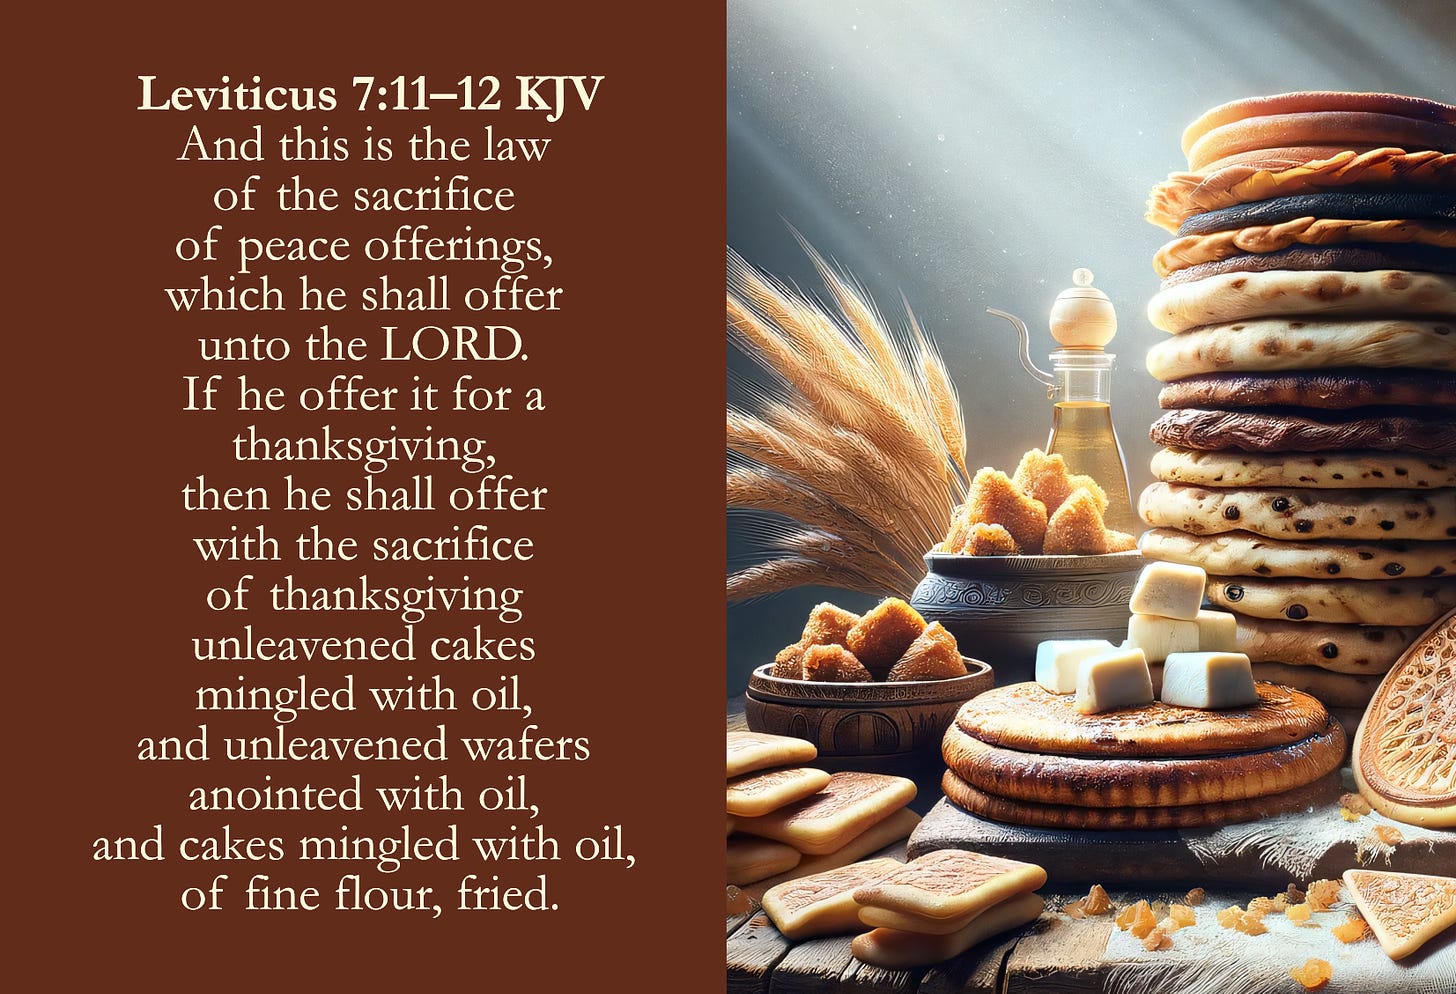 Thanksgiving Cakes KJV Card - Leviticus 7:11–12 KJV - And this is the law of the sacrifice of peace offerings, which he shall offer unto the Lord. If he offer it for a thanksgiving, then he shall offer with the sacrifice of thanksgiving unleavened cakes mingled with oil, and unleavened wafers anointed with oil, and cakes mingled with oil, of fine flour, fried. 